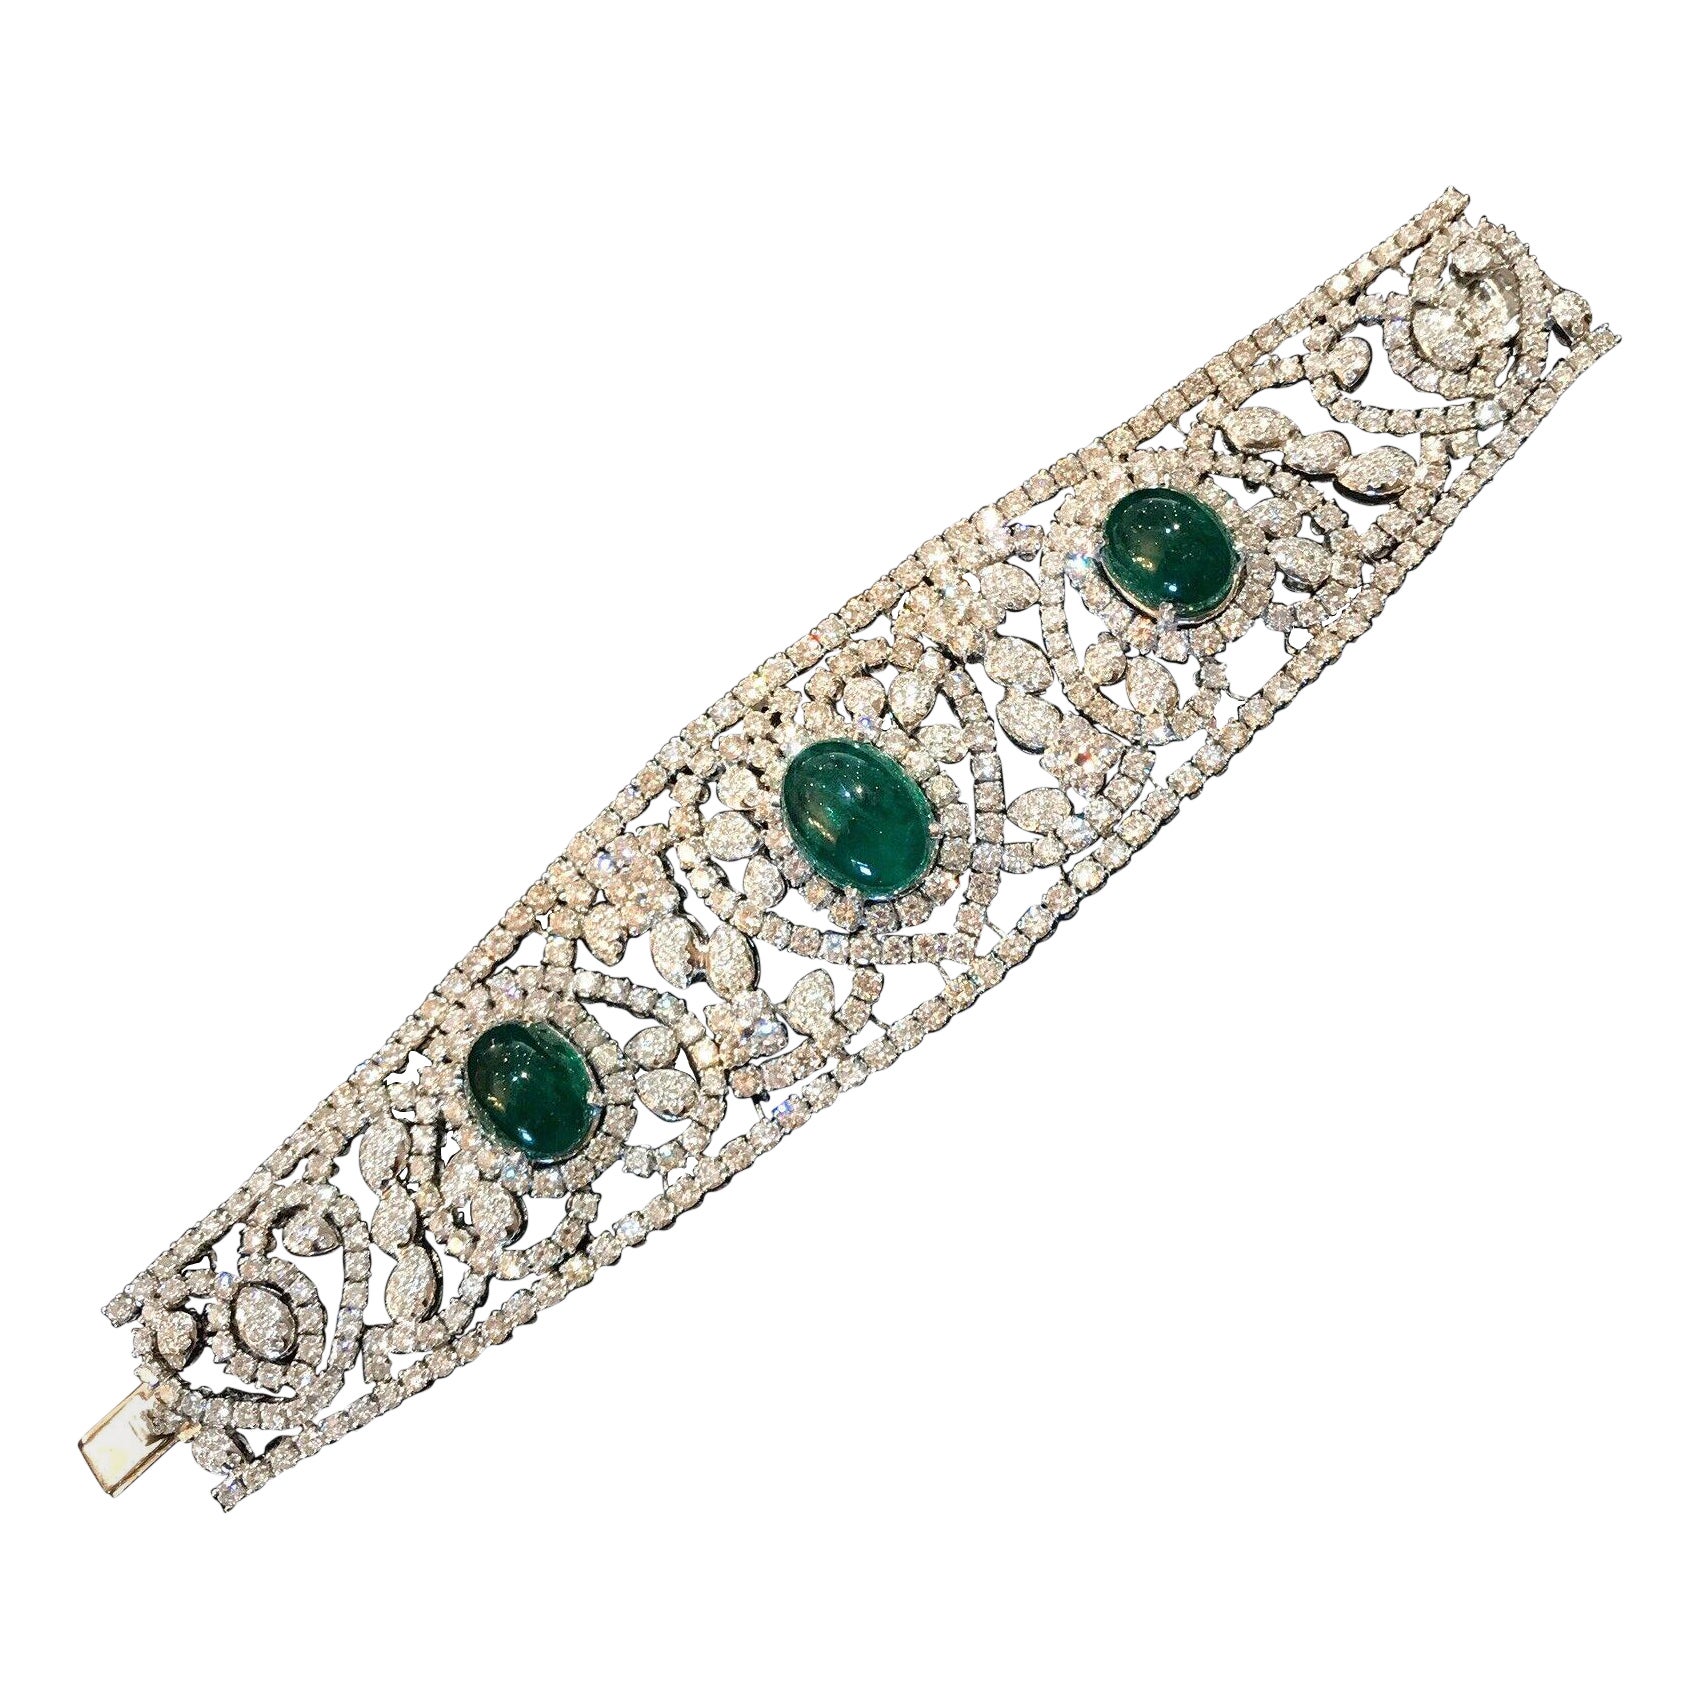 Lot 53 | An 18K White Gold, Colombian Cabochon Emerald, and Diamond Bracelet  - YouTube